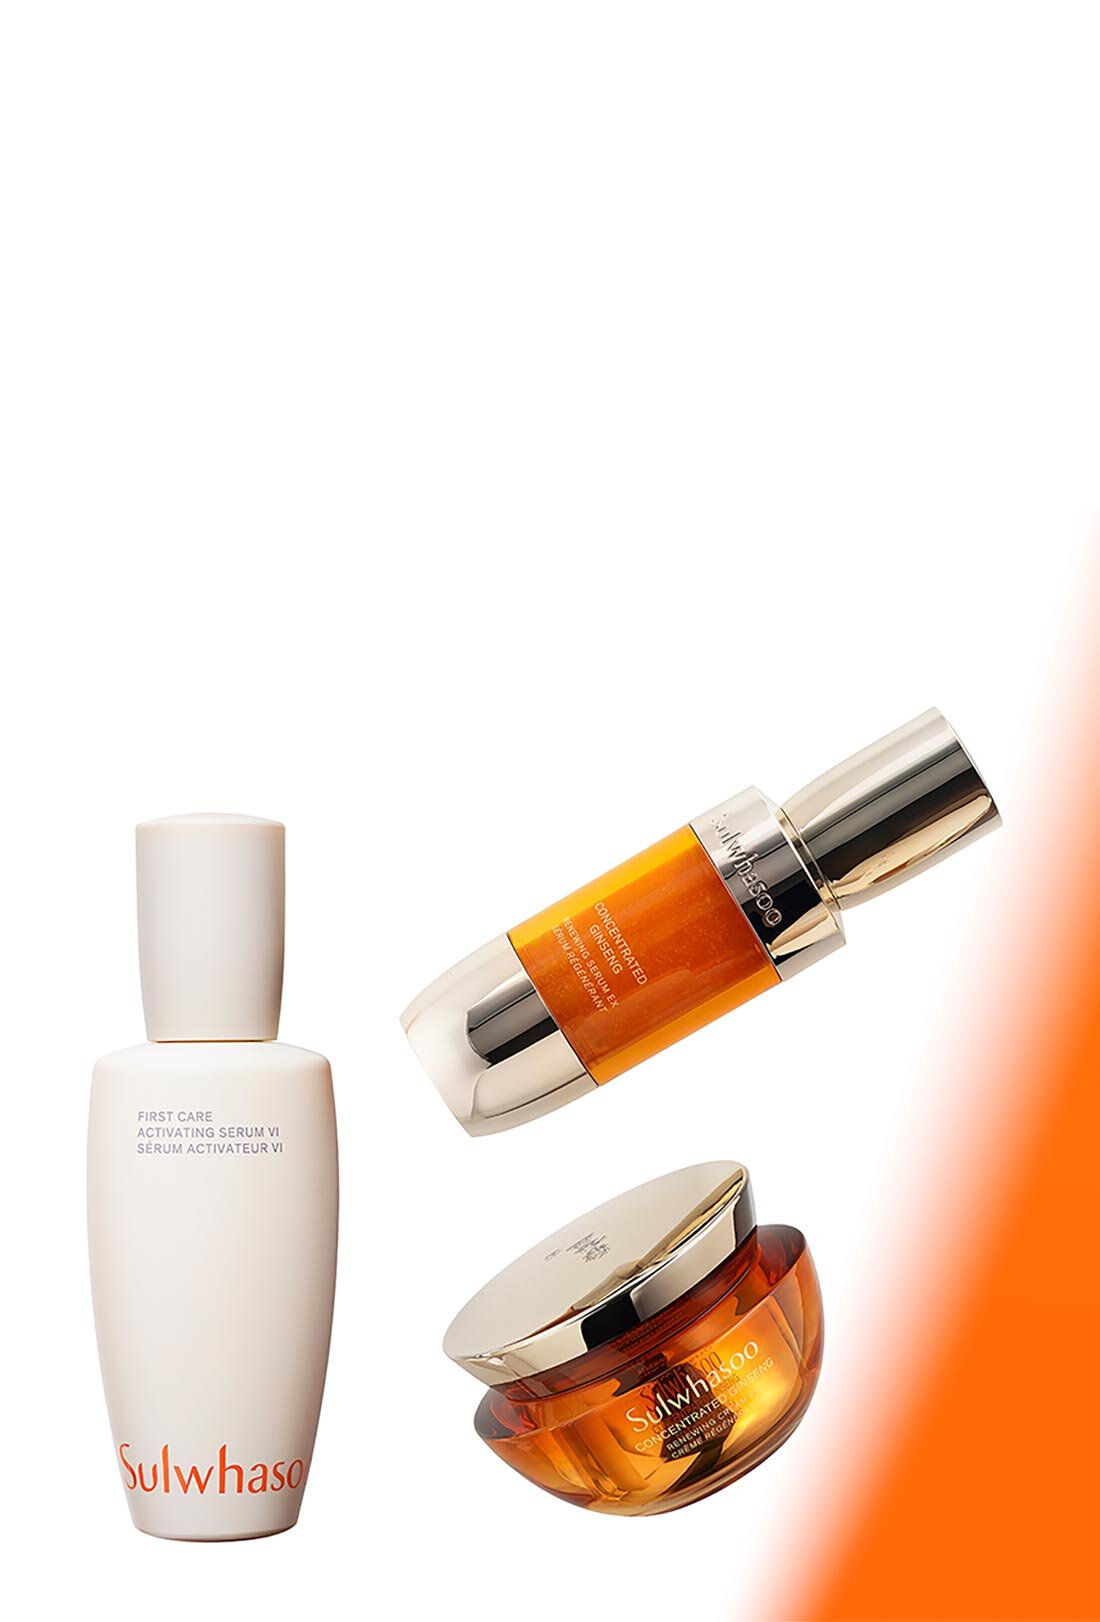 First Care Activating Serum , Concentrated Ginseng Renewing Serum EX, Concentrated Ginseng Renewing Perfecting Cream EX